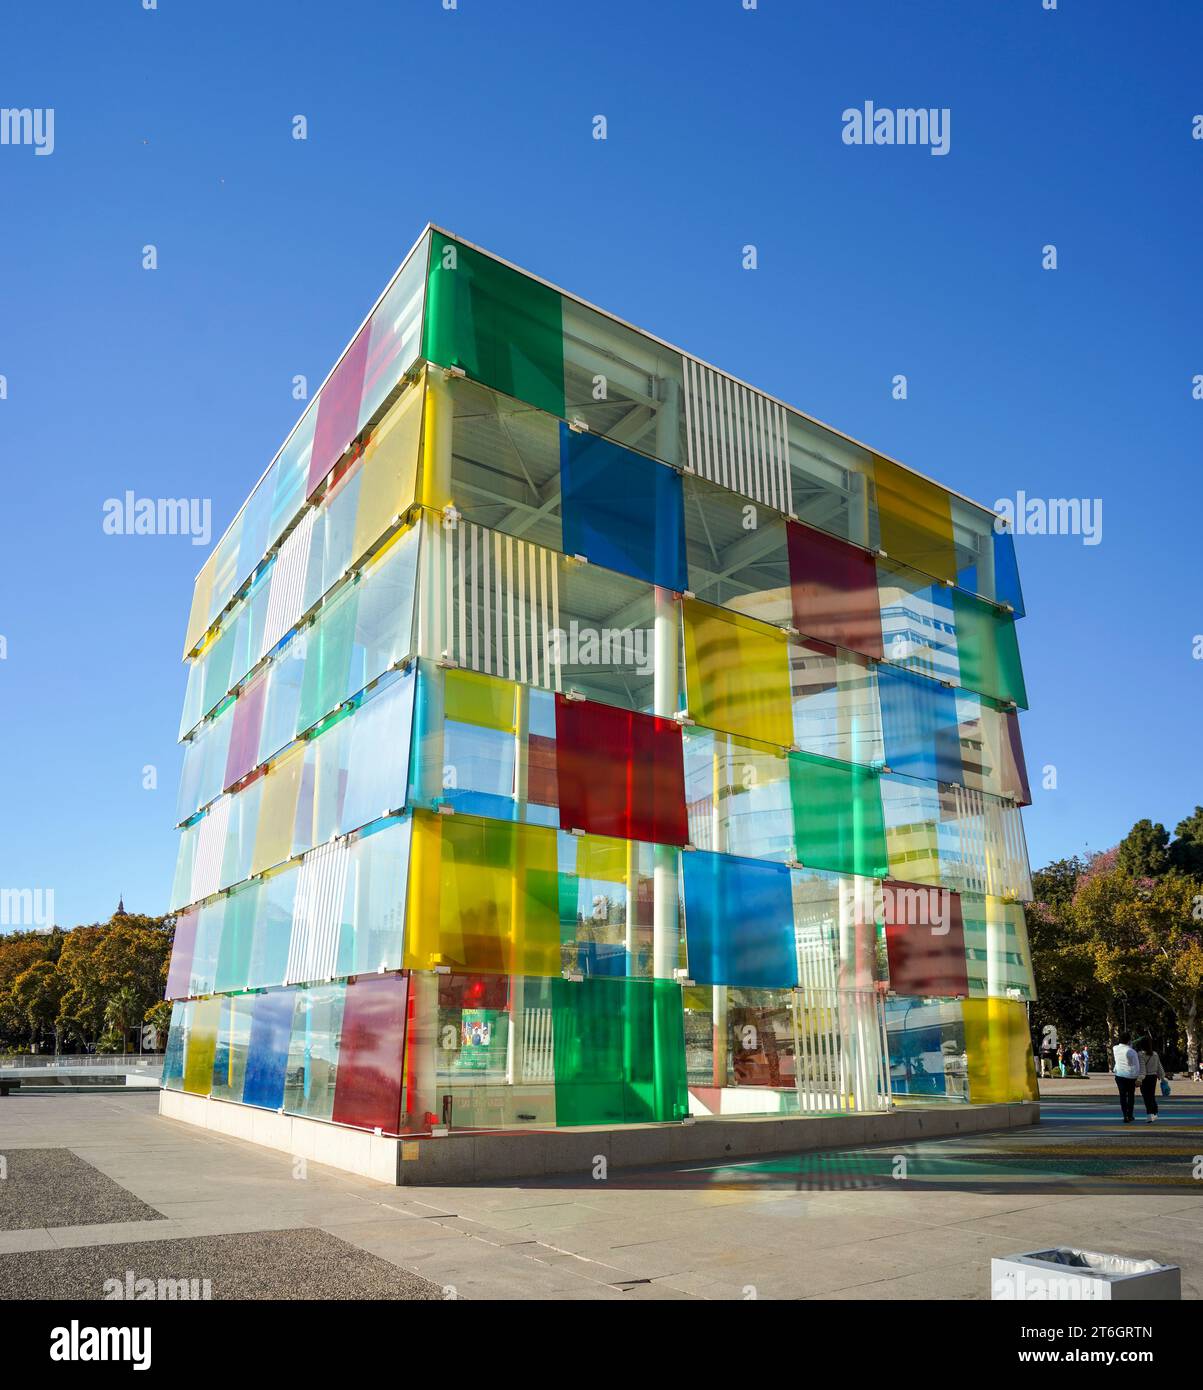 Pompidou Malaga centre, The Centre Pompidou, the cube, Pop up museum, at Muelle uno, port of Malaga, Andalusia, Spain. Stock Photo